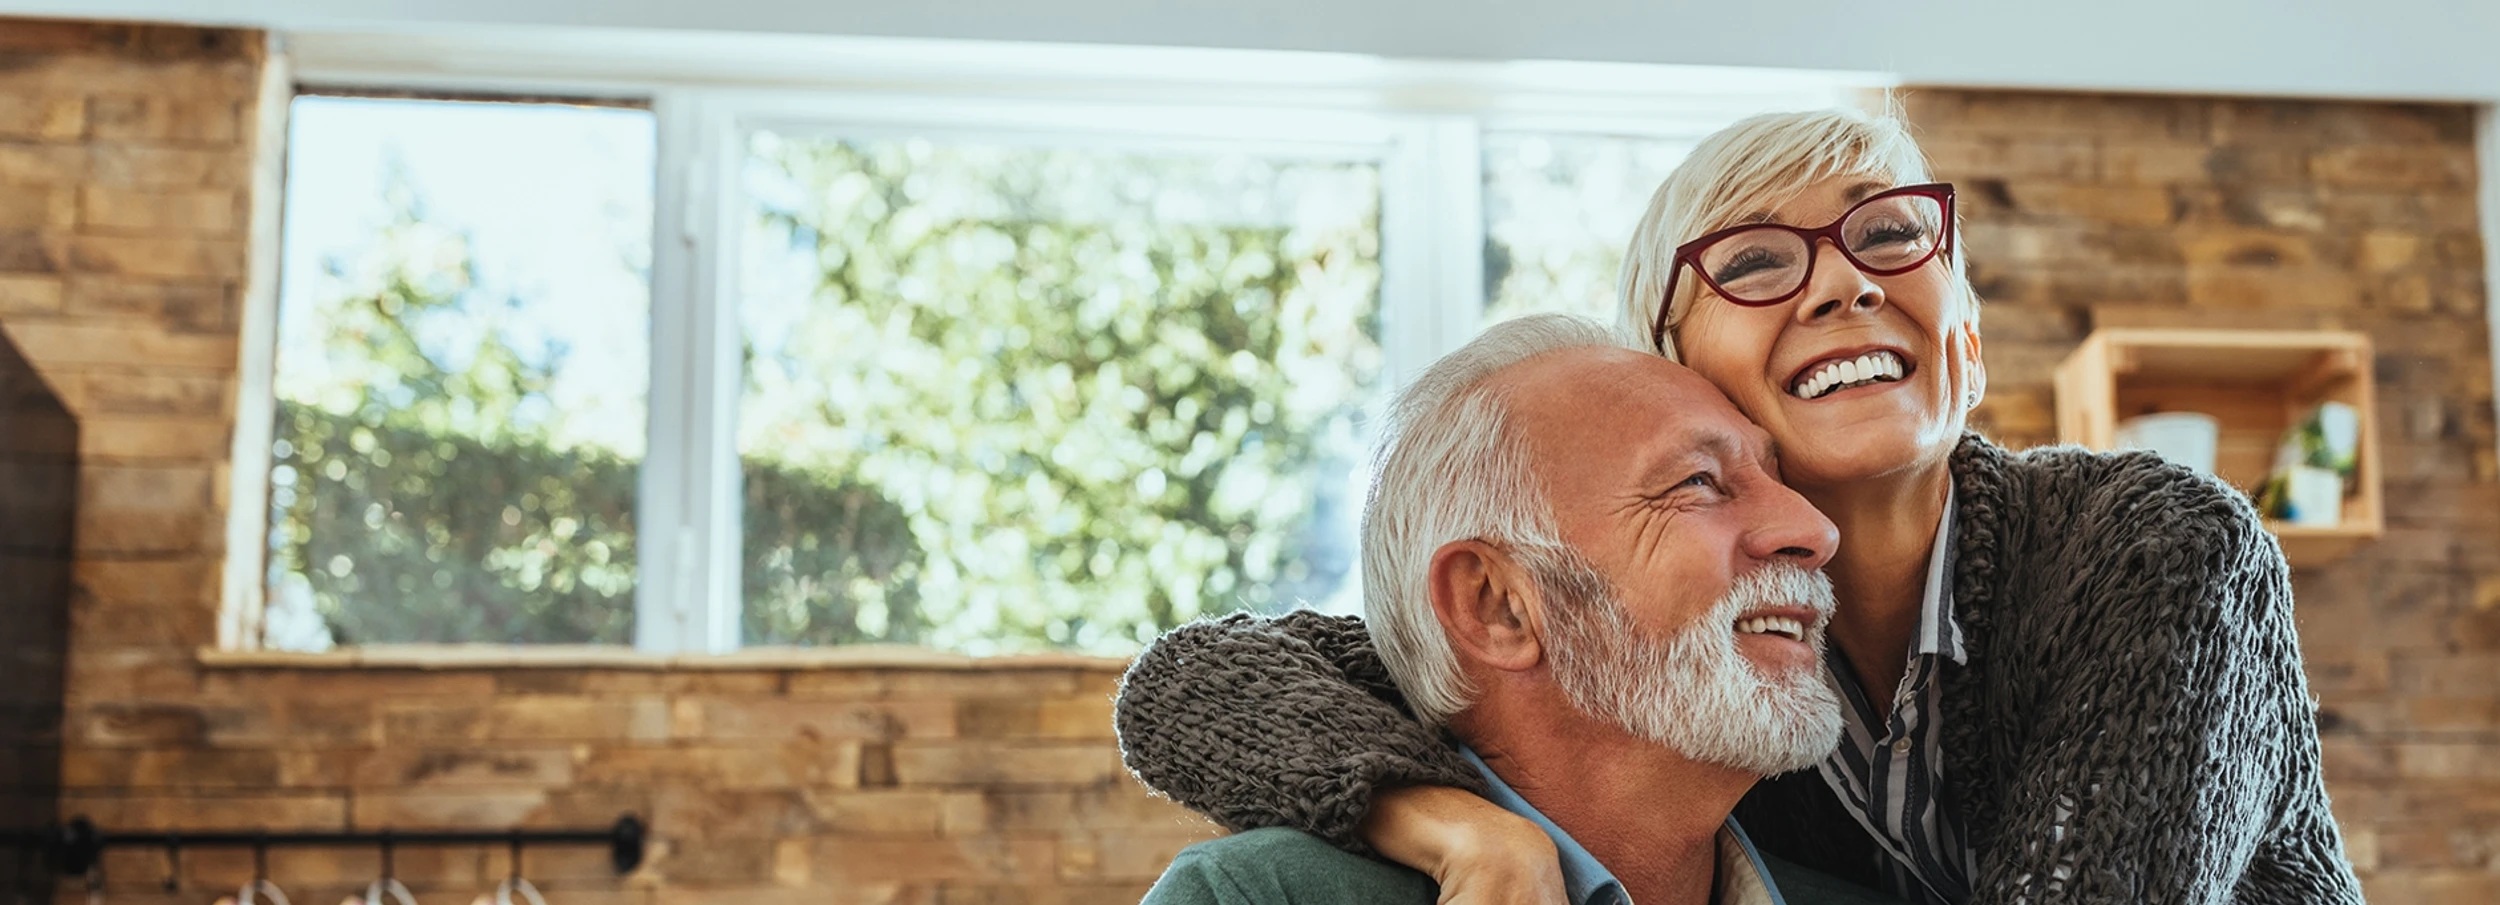 Senior couple smiling and embracing in front of large window set in wood panel wall inside cozy home.